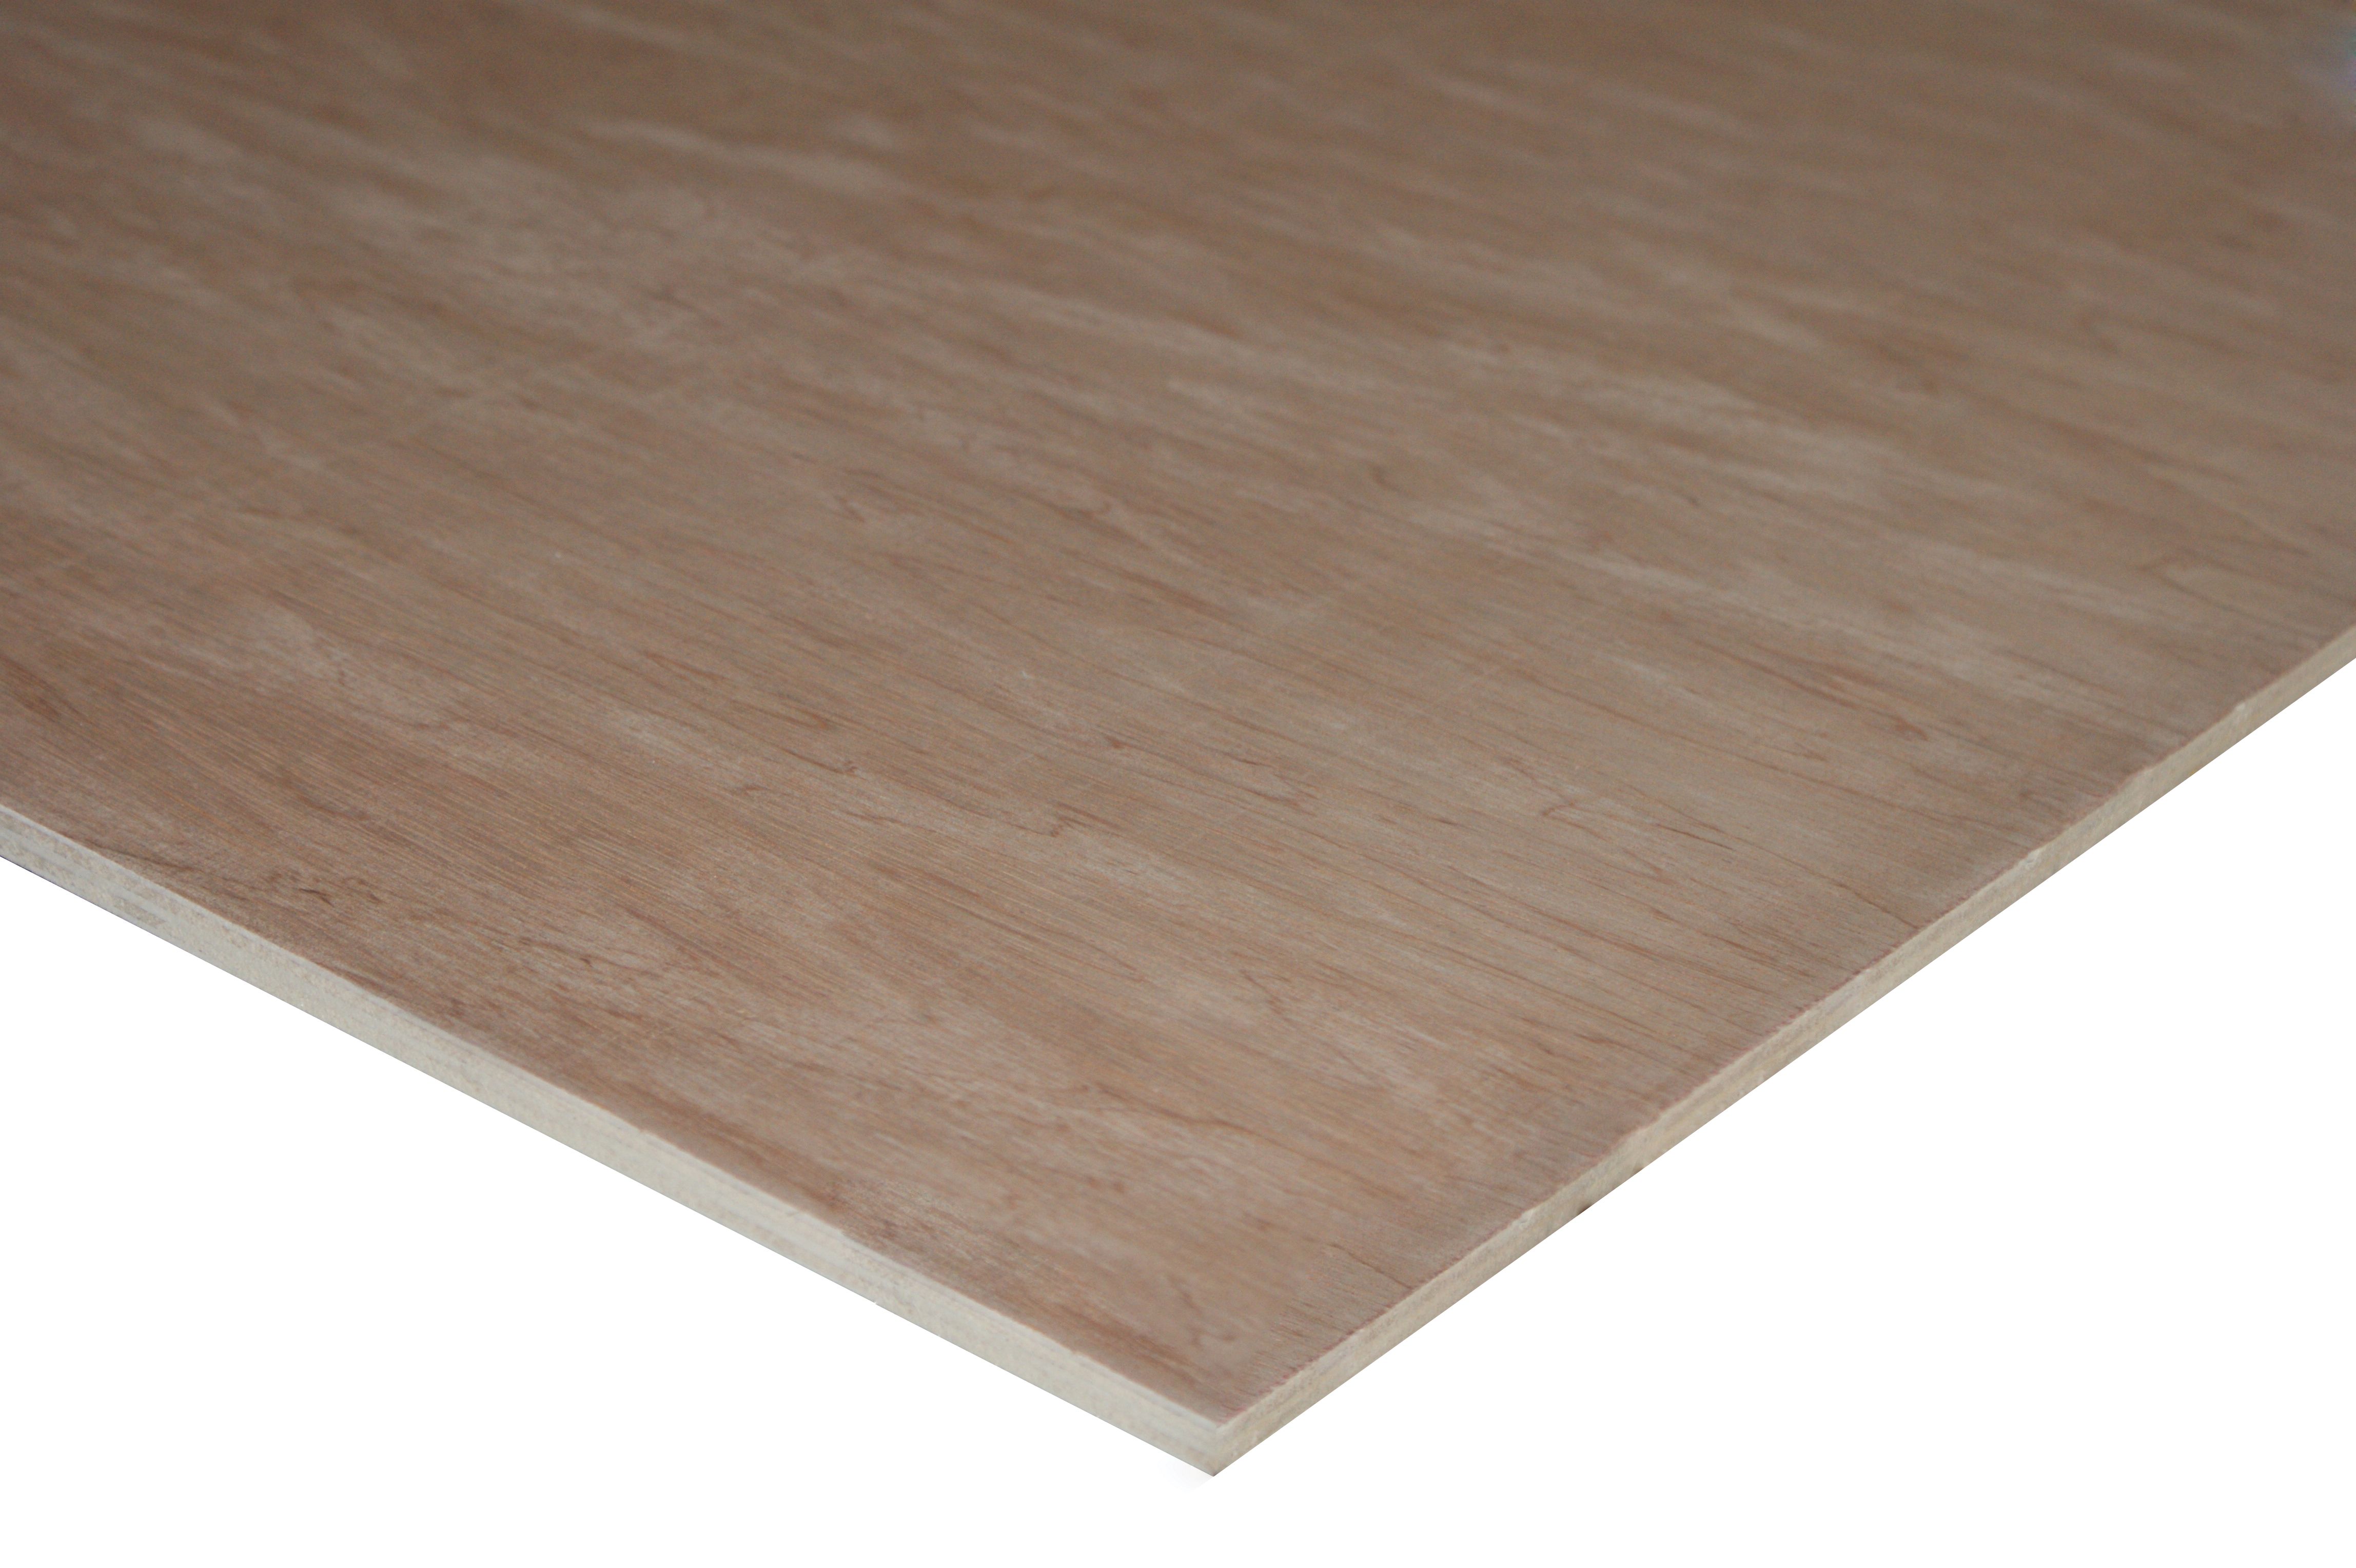 Image of Wickes Non-Structural Hardwood Plywood - 18 x 606 x 1829mm